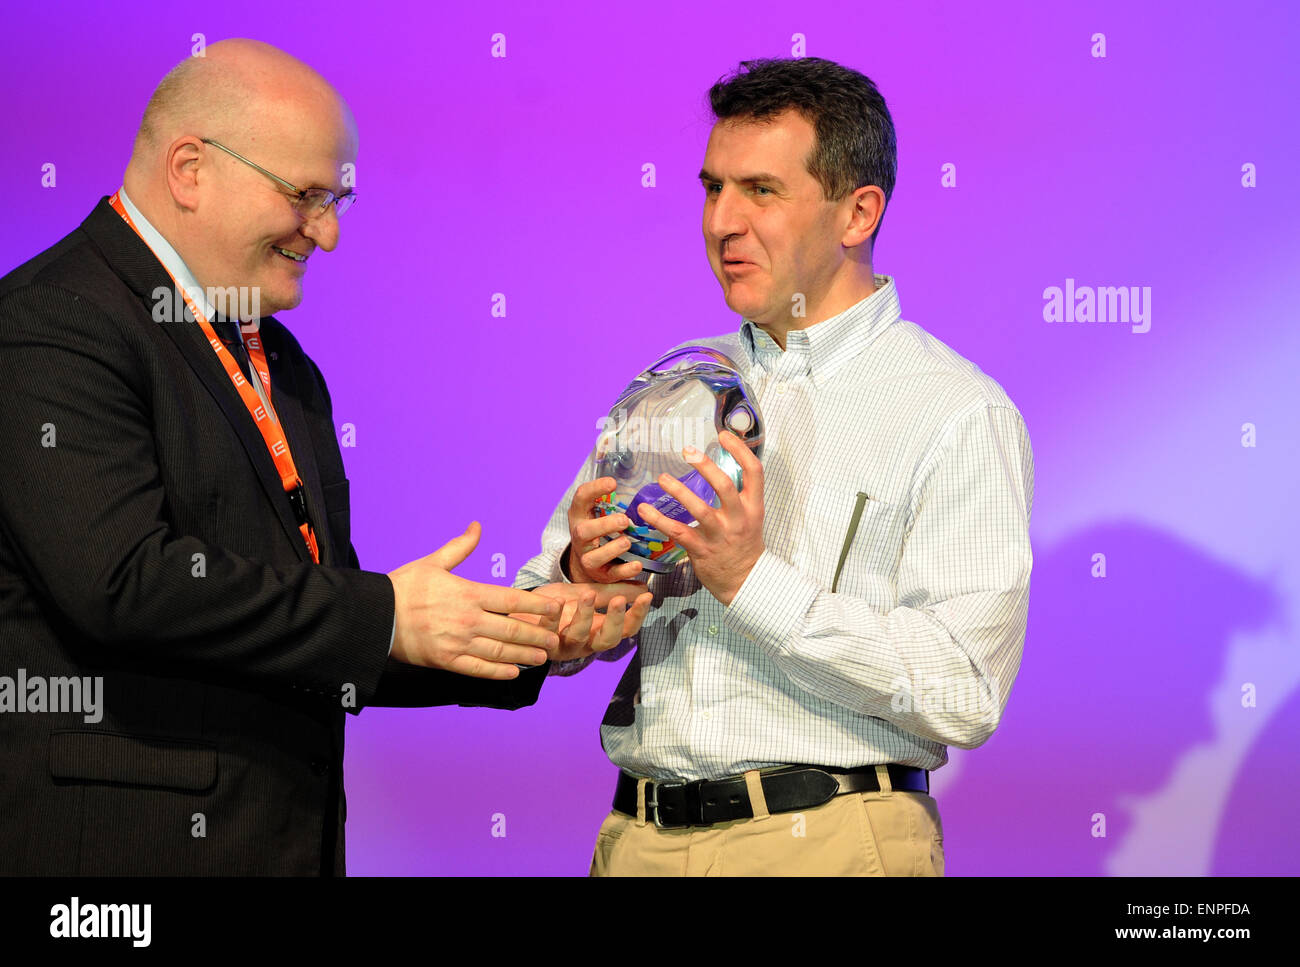 Trebon, Czech Republic. 9th May, 2015. Spanish director Sam Conflictivos (not pictured) won the main award for the best animated full-length film for adults with his puppet horror comedy Possessed at the Anifilm international festival of animated films in Trebon, Czech Republic, May 9, 2015. Representative of the Embassy of Spain Miguel Alonso Berrio (right) accepted the award on behalf of Sam Conflictivos from hands of Czech Minister of Culture Daniel Herman (left). © Vaclav Pancer/CTK Photo/Alamy Live News Stock Photo